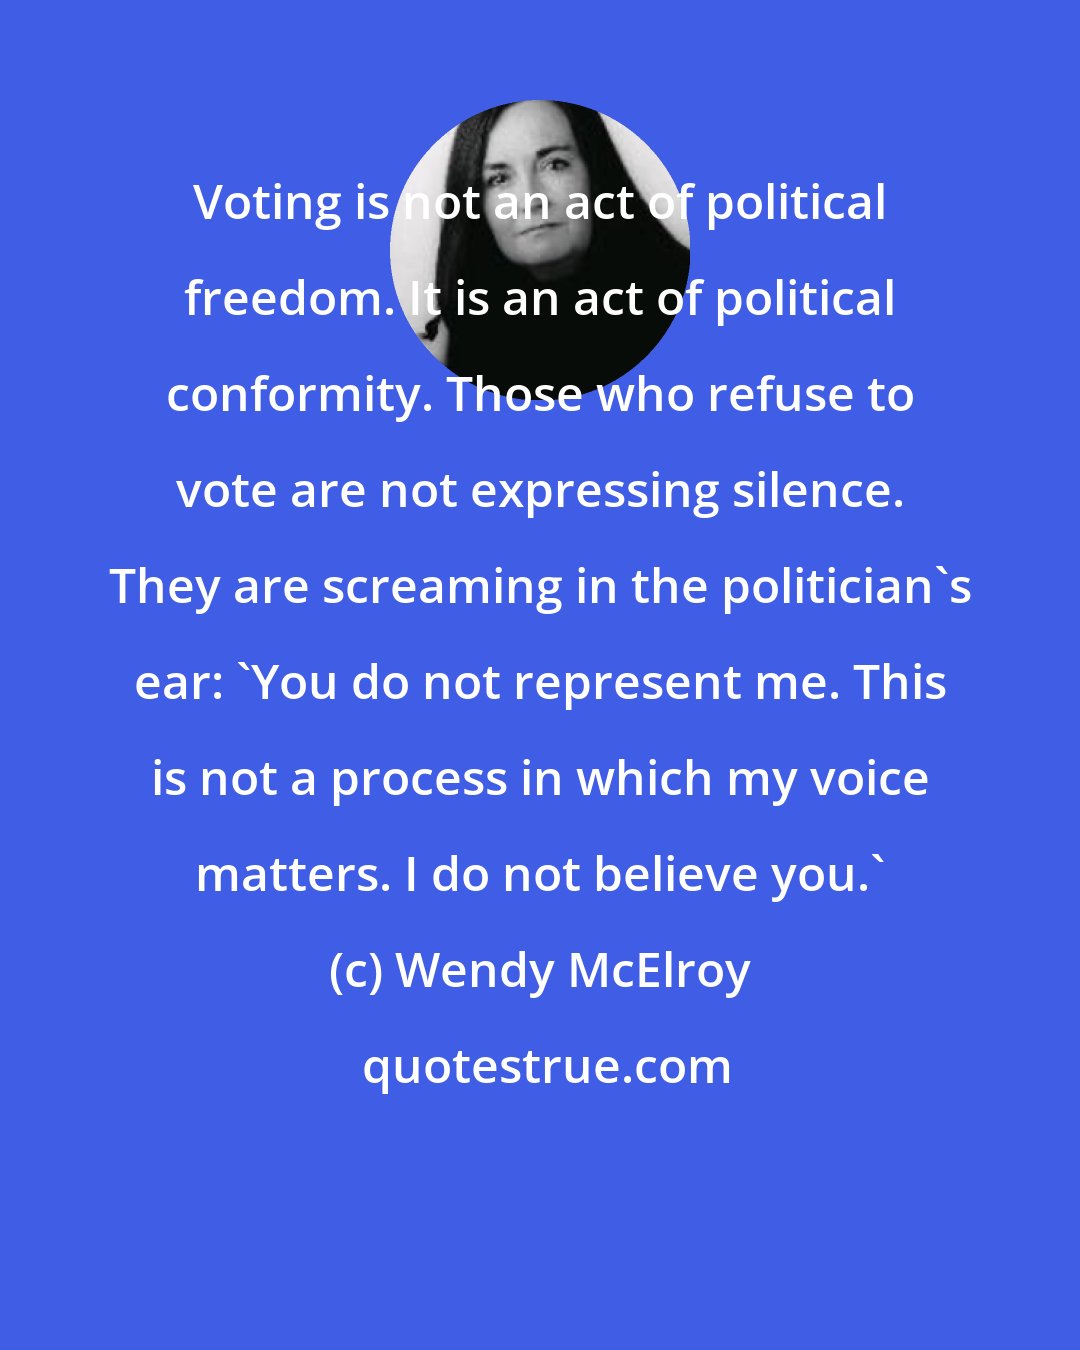 Wendy McElroy: Voting is not an act of political freedom. It is an act of political conformity. Those who refuse to vote are not expressing silence. They are screaming in the politician's ear: 'You do not represent me. This is not a process in which my voice matters. I do not believe you.'